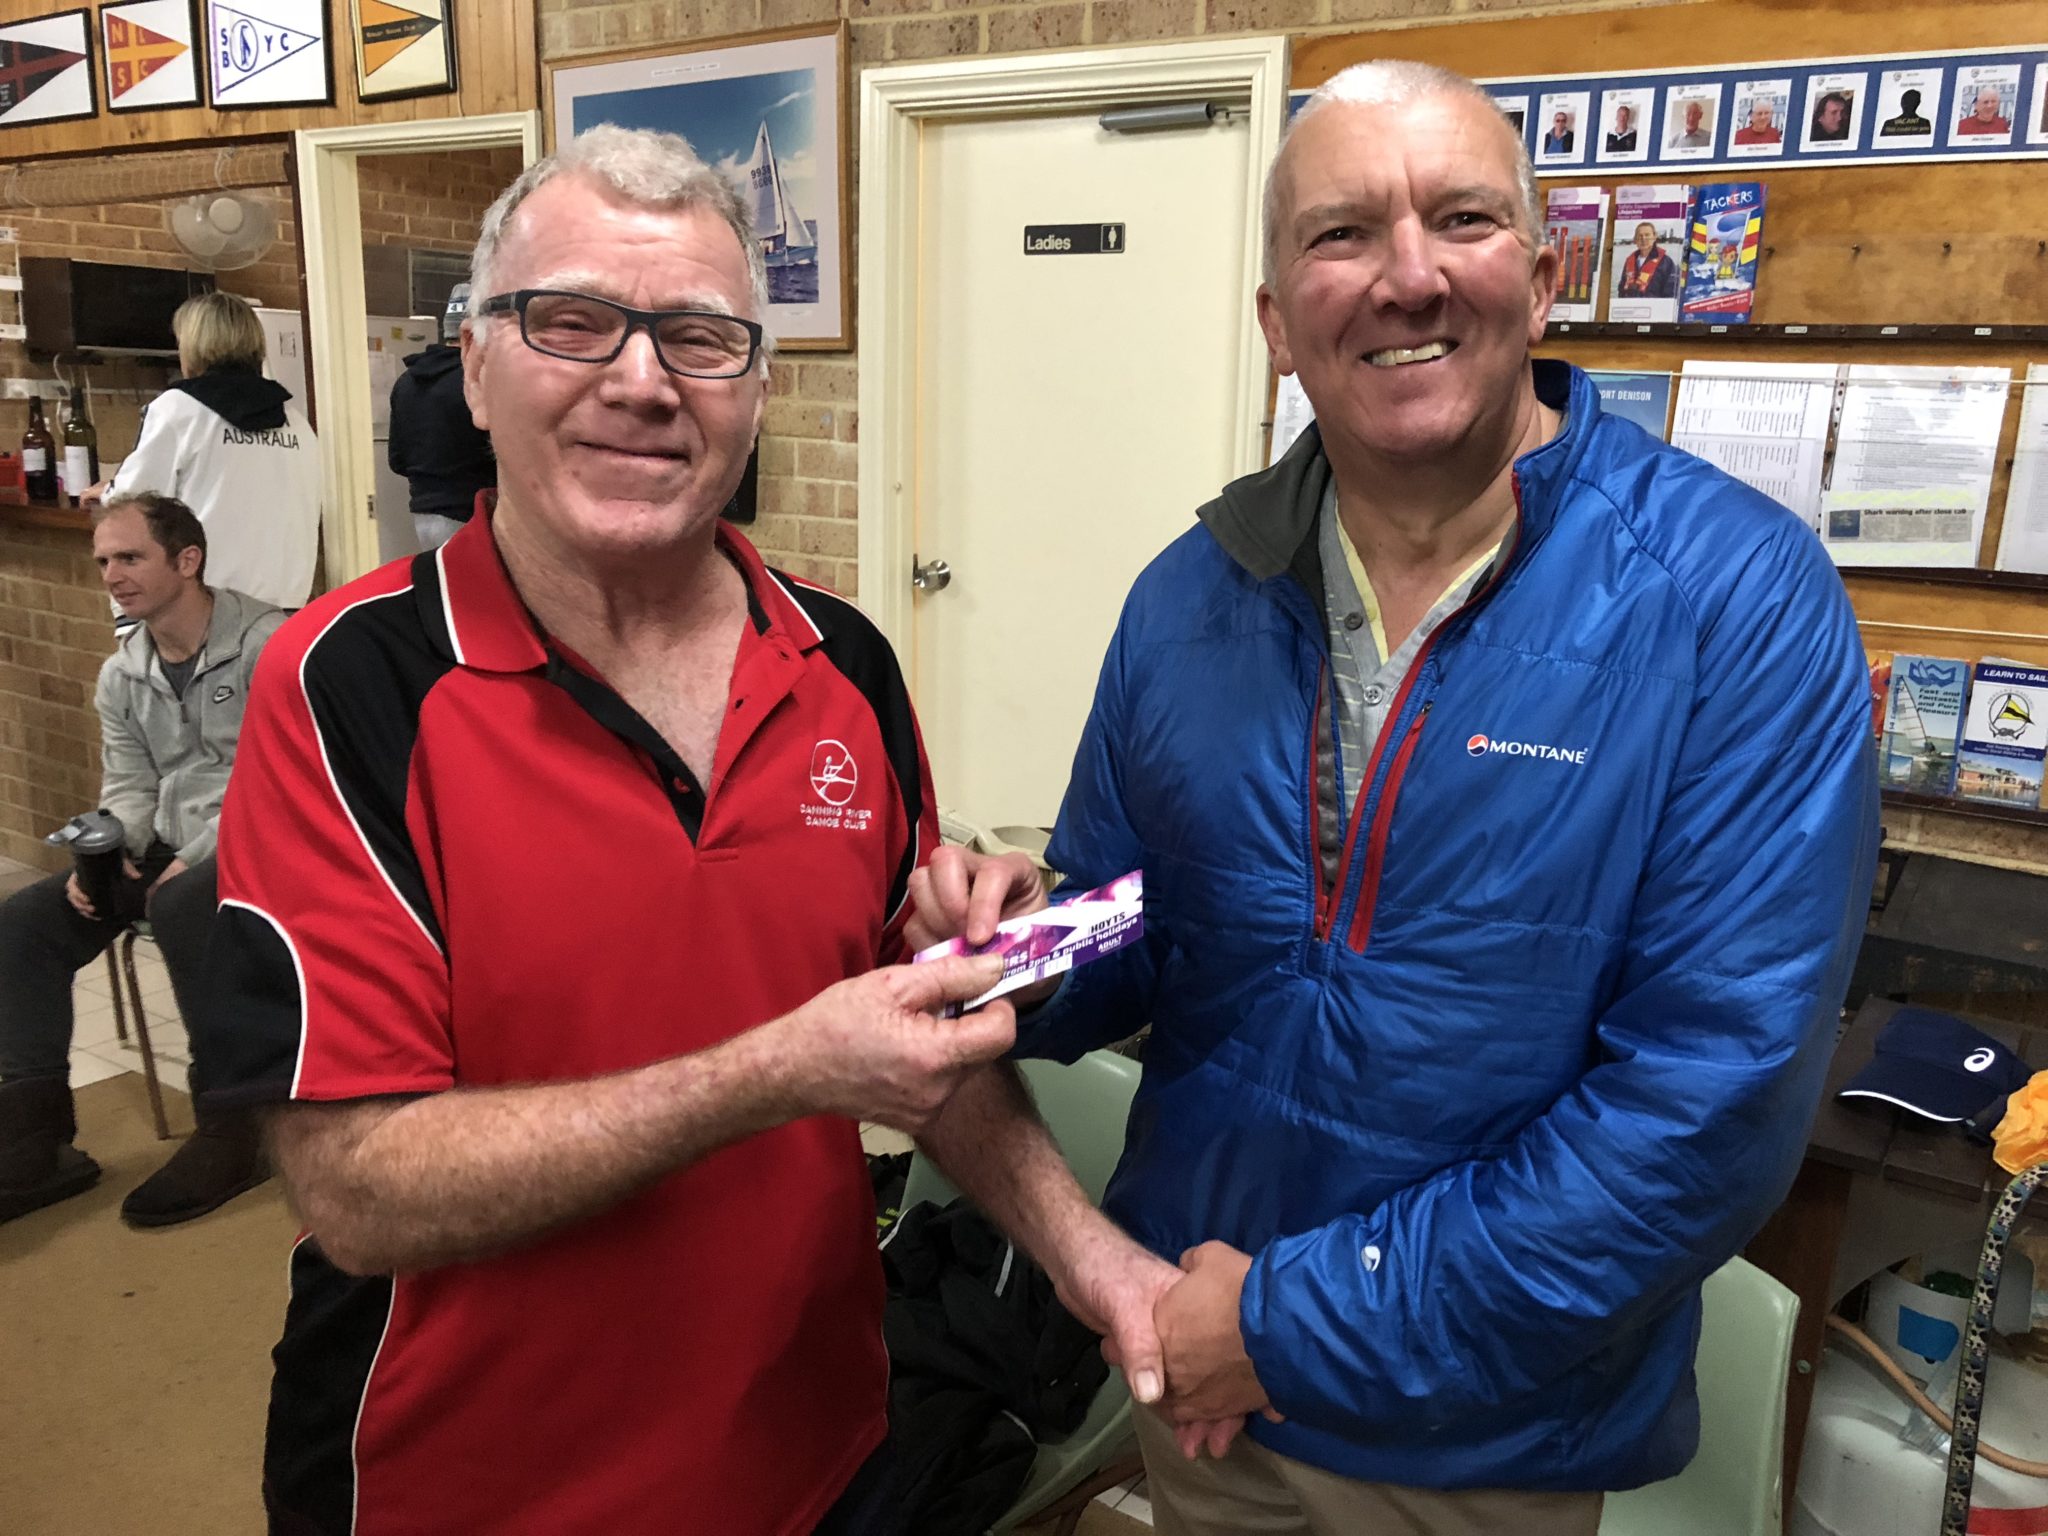 Tues 14th August 2018 : Tonight’s photo shows Last weeks winner David Gardiner presenting Malcolm with a movie voucher.